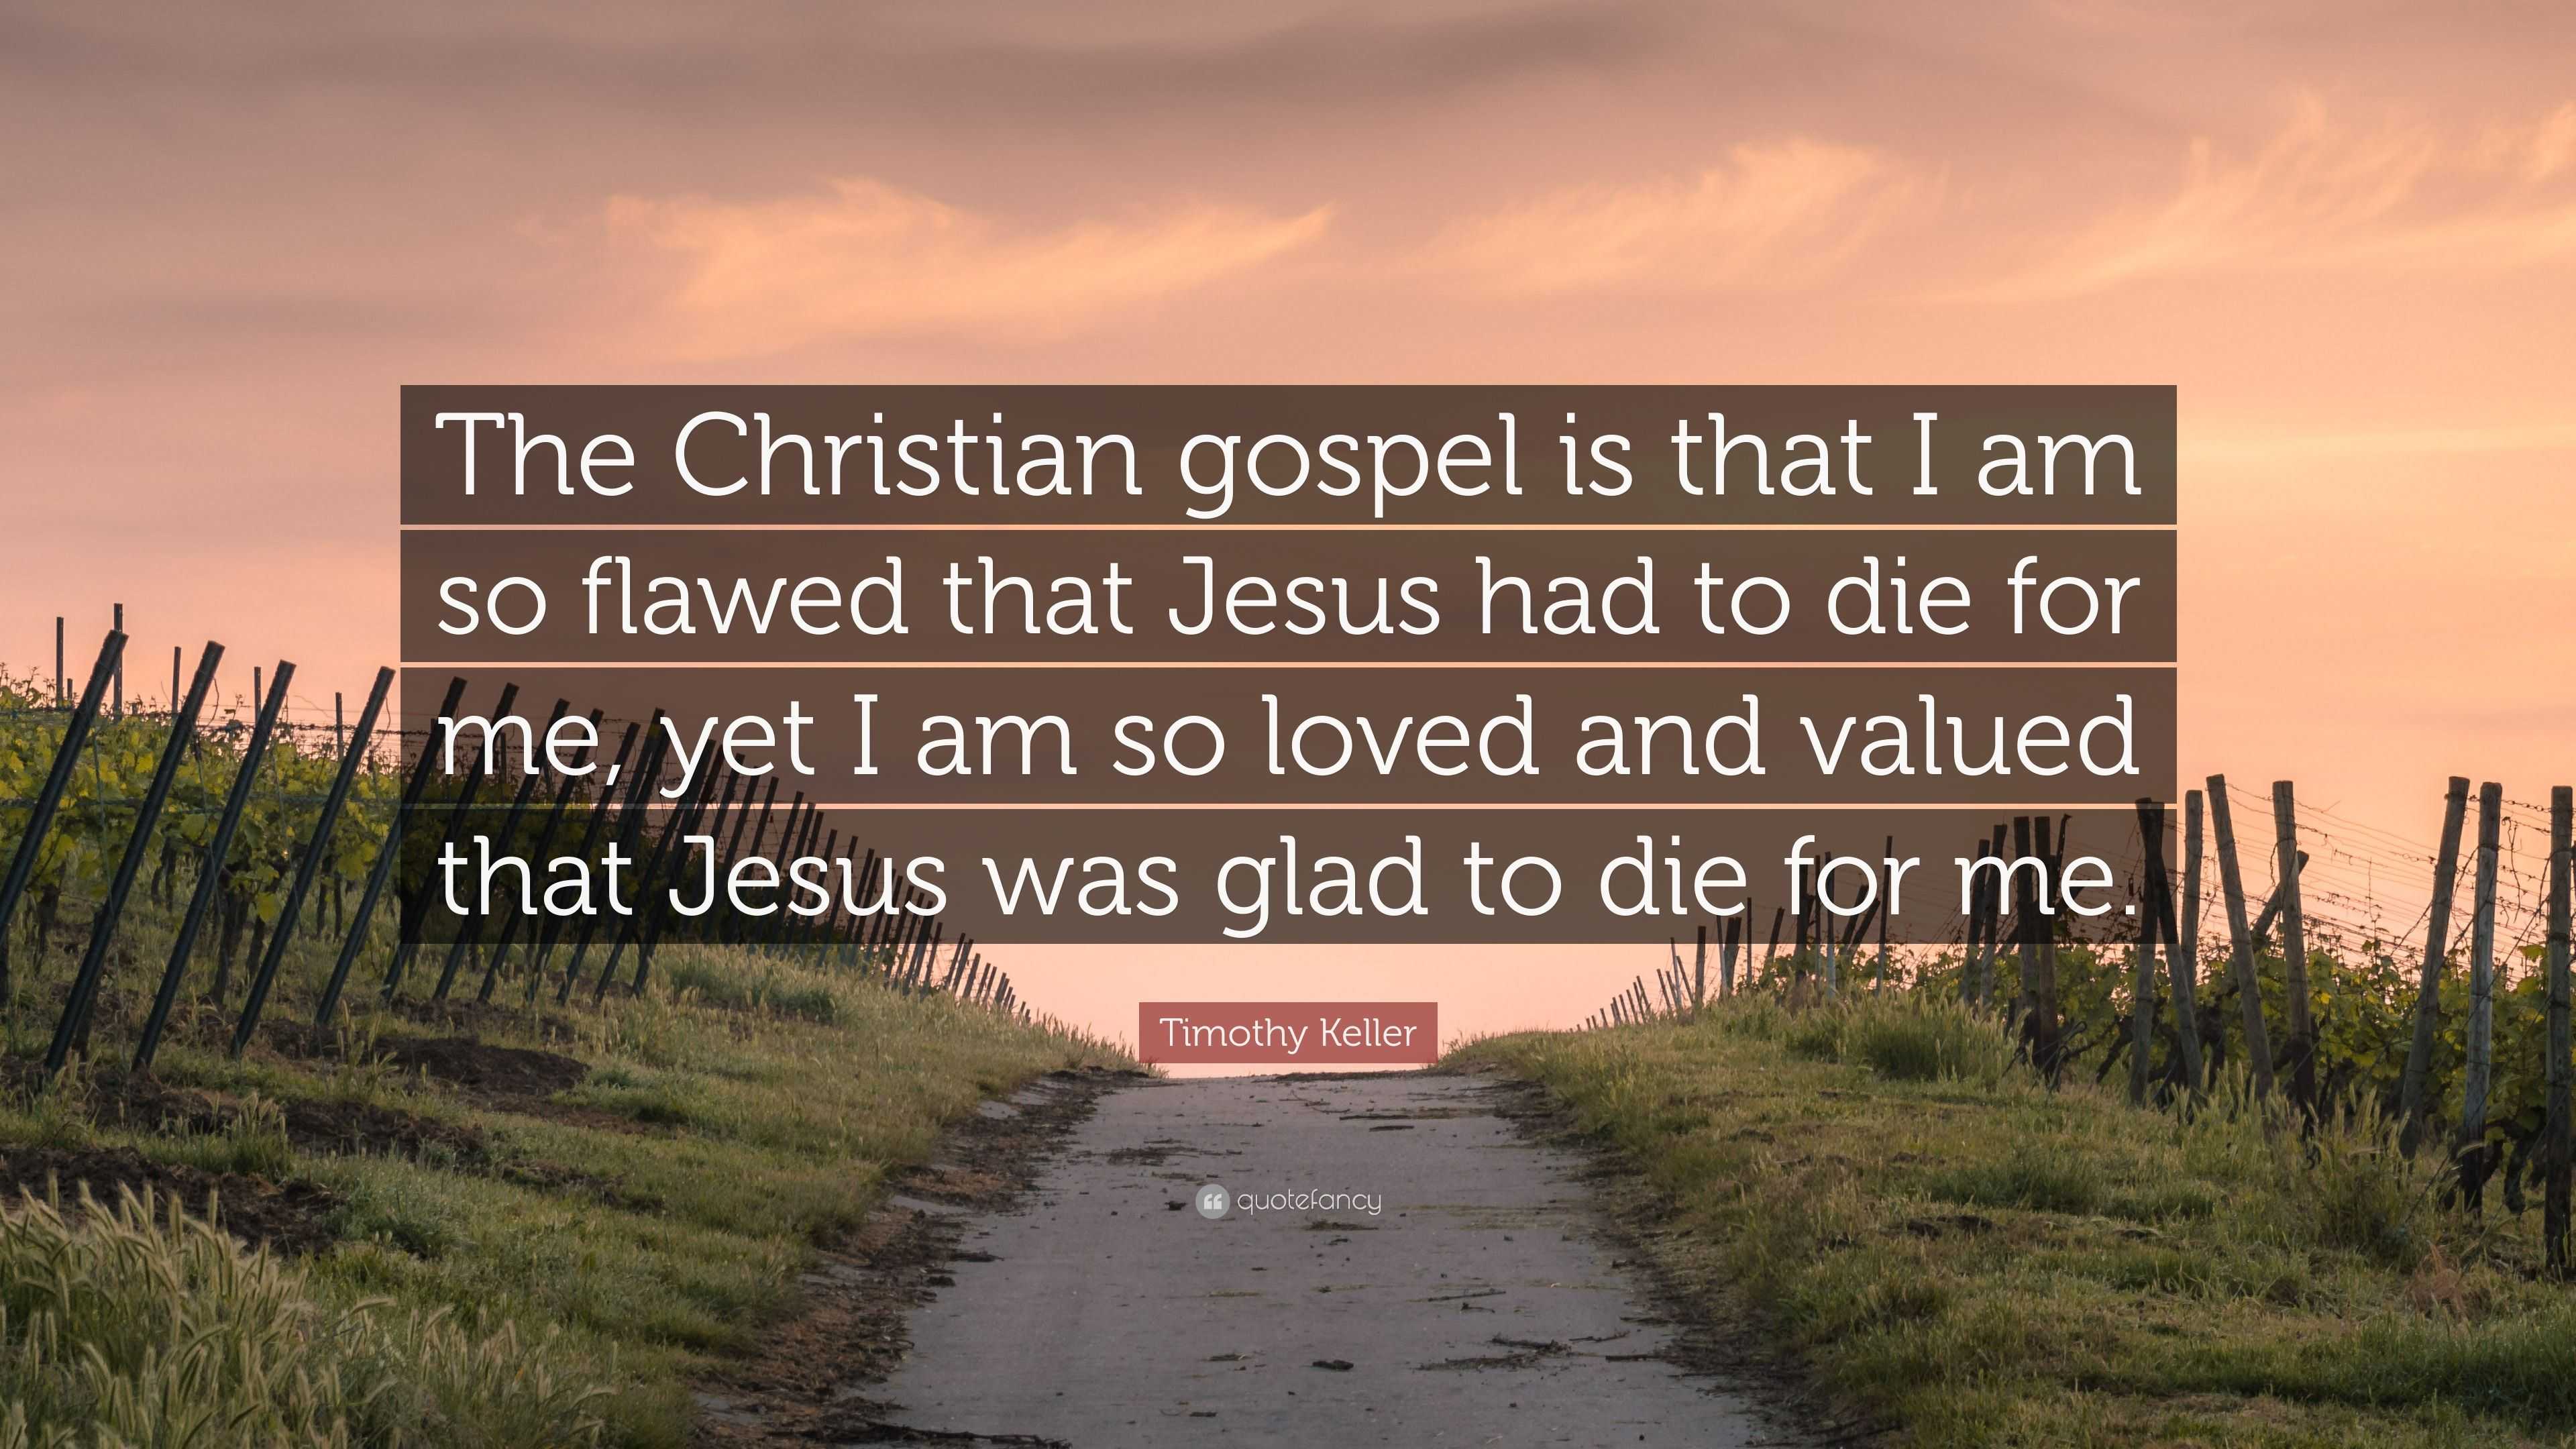 Timothy Keller Quote: “The Christian gospel is that I am so flawed that ...